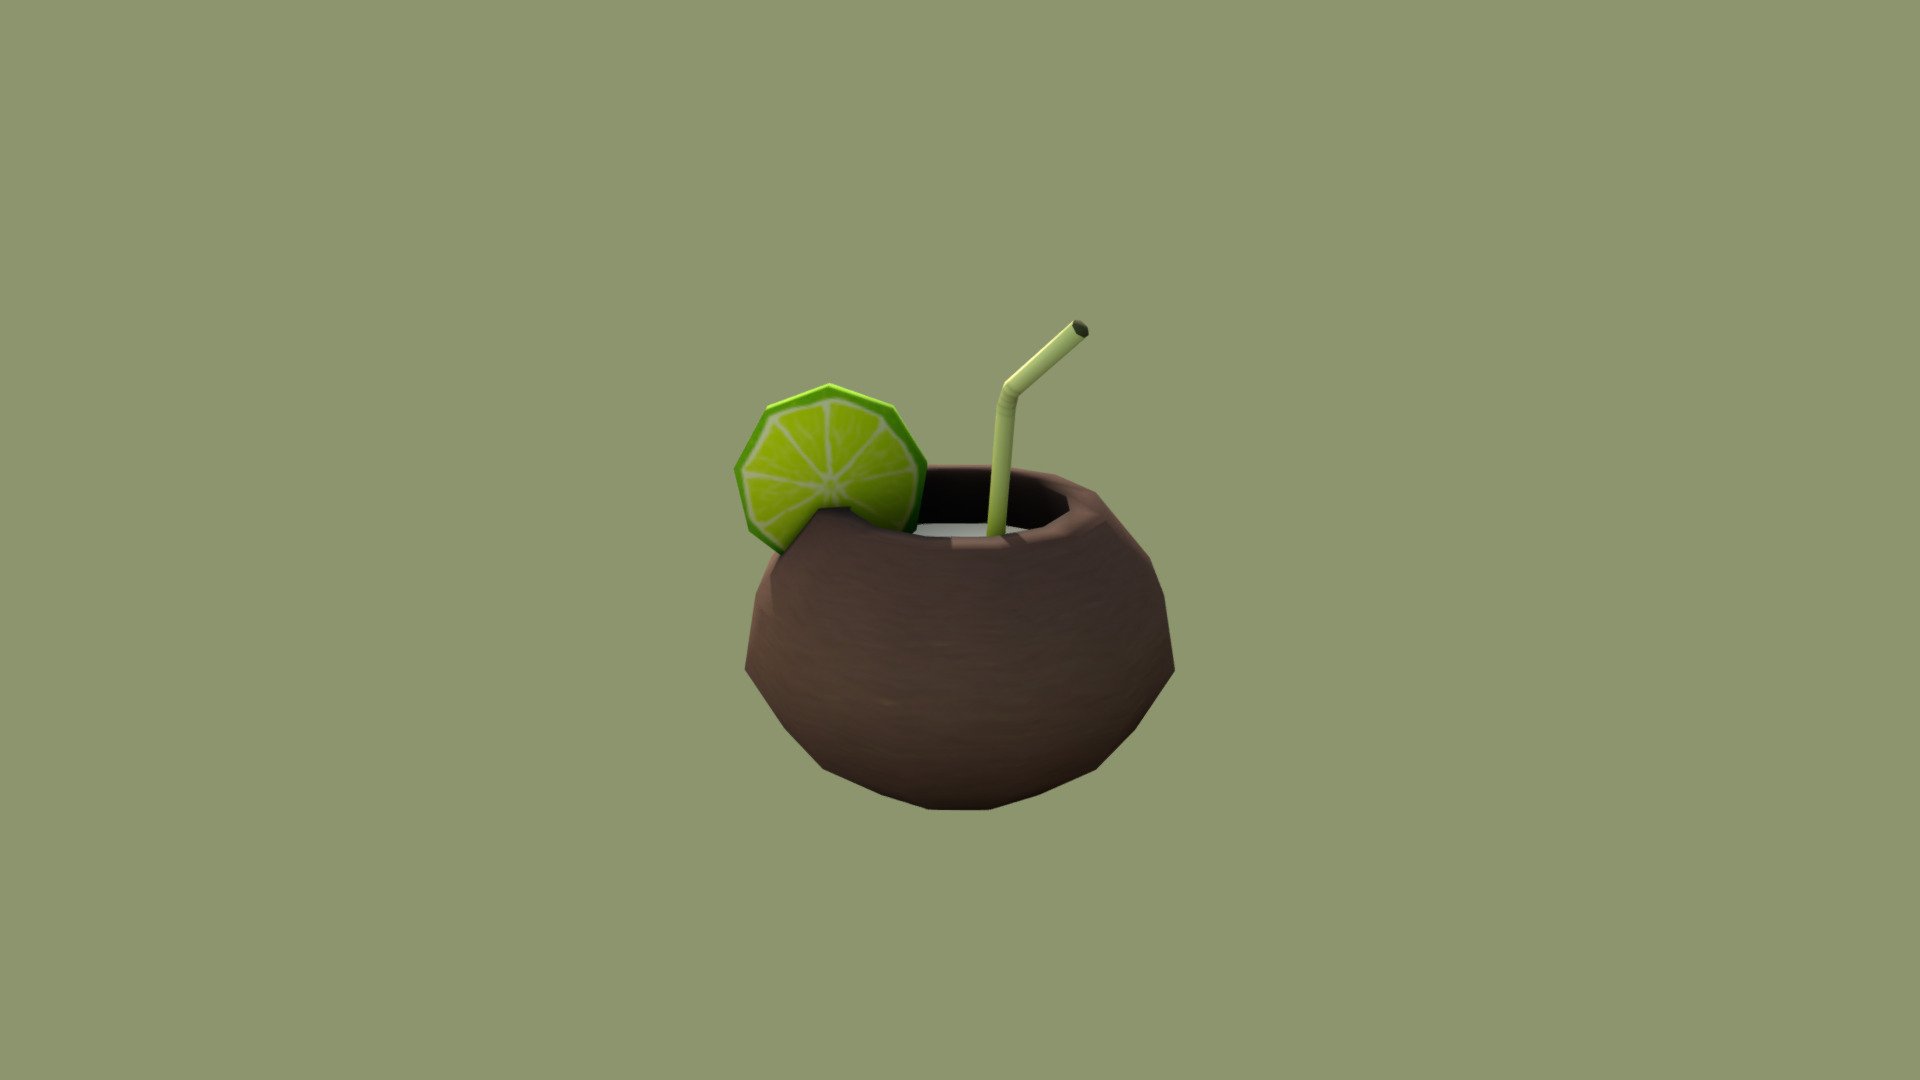 put the lime in the coconut

(I actually made this a while ago and forgot to put it here) - Coconut Drink - 3D model by Rika Creature (@rikacreature) 3d model